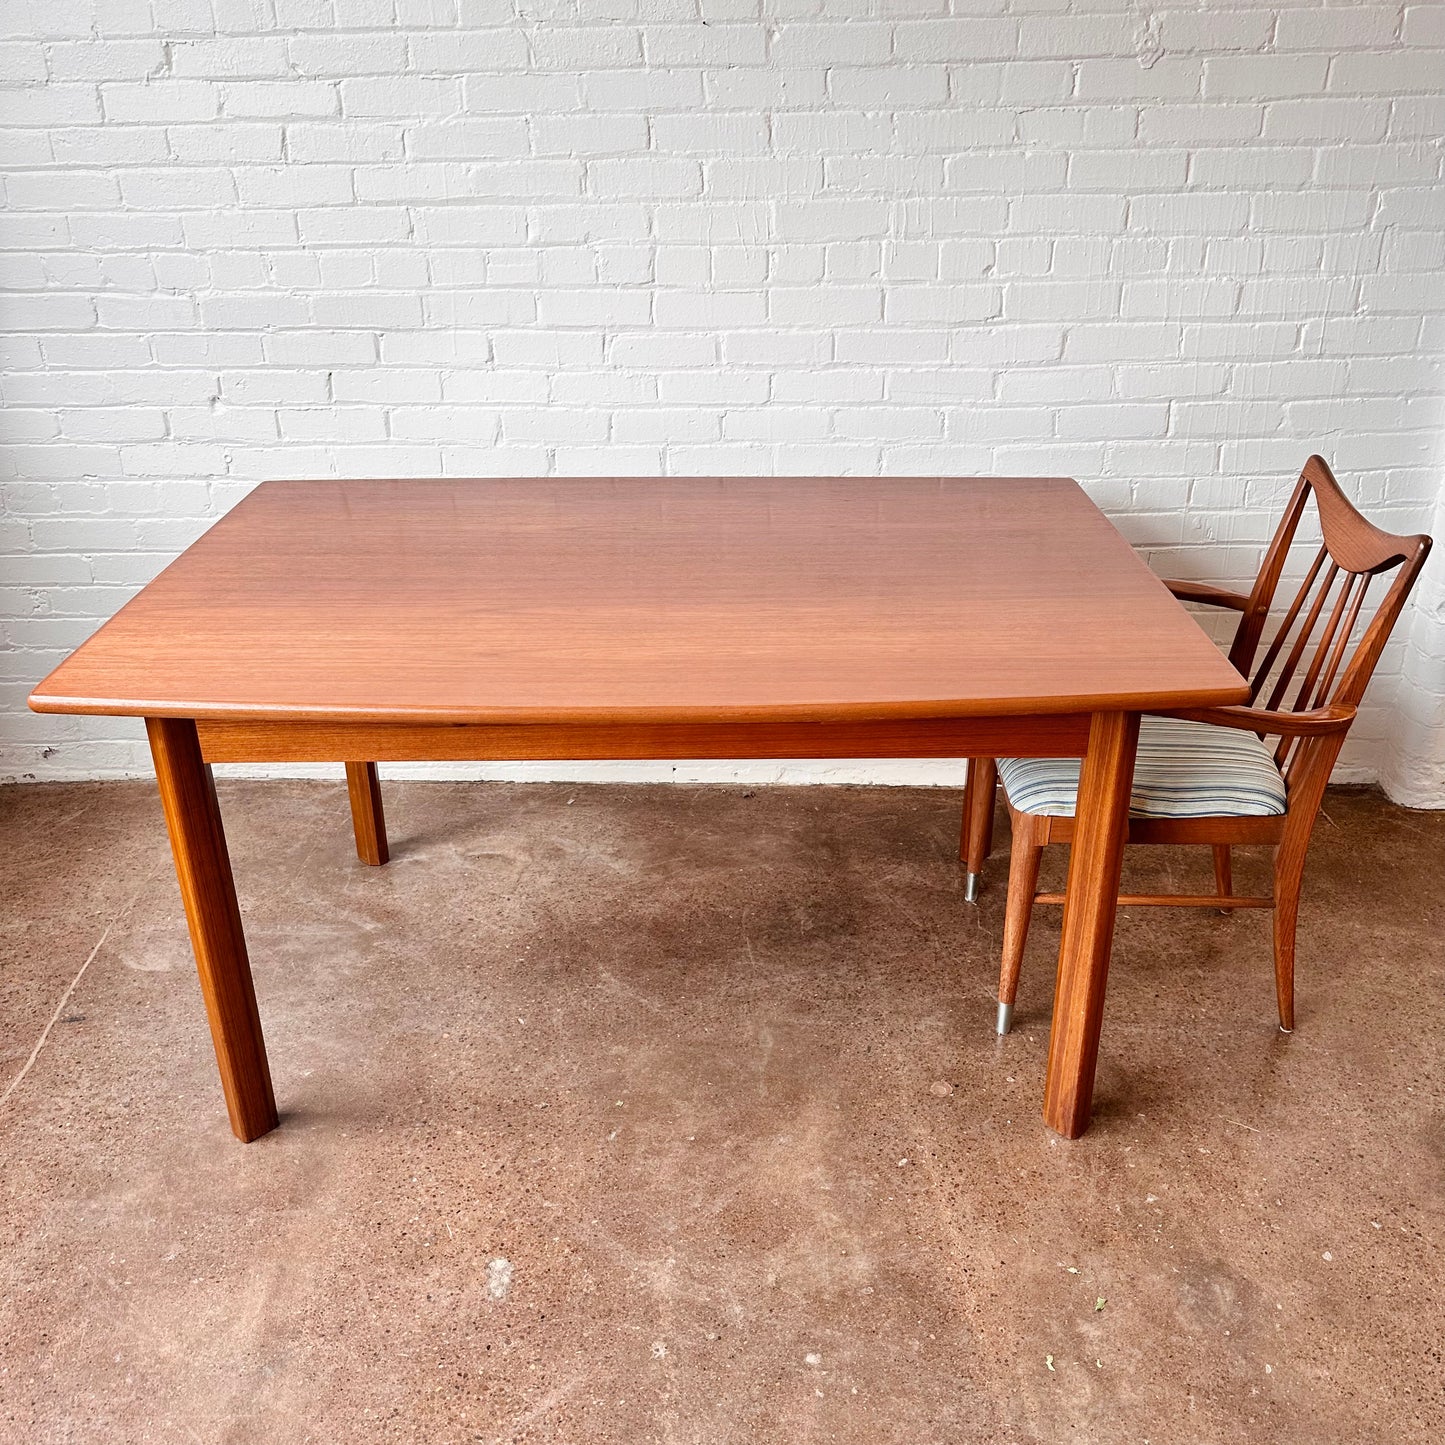 RESTORED BOAT-SHAPE TEAK DINING TABLE WITH EXTENSIONS